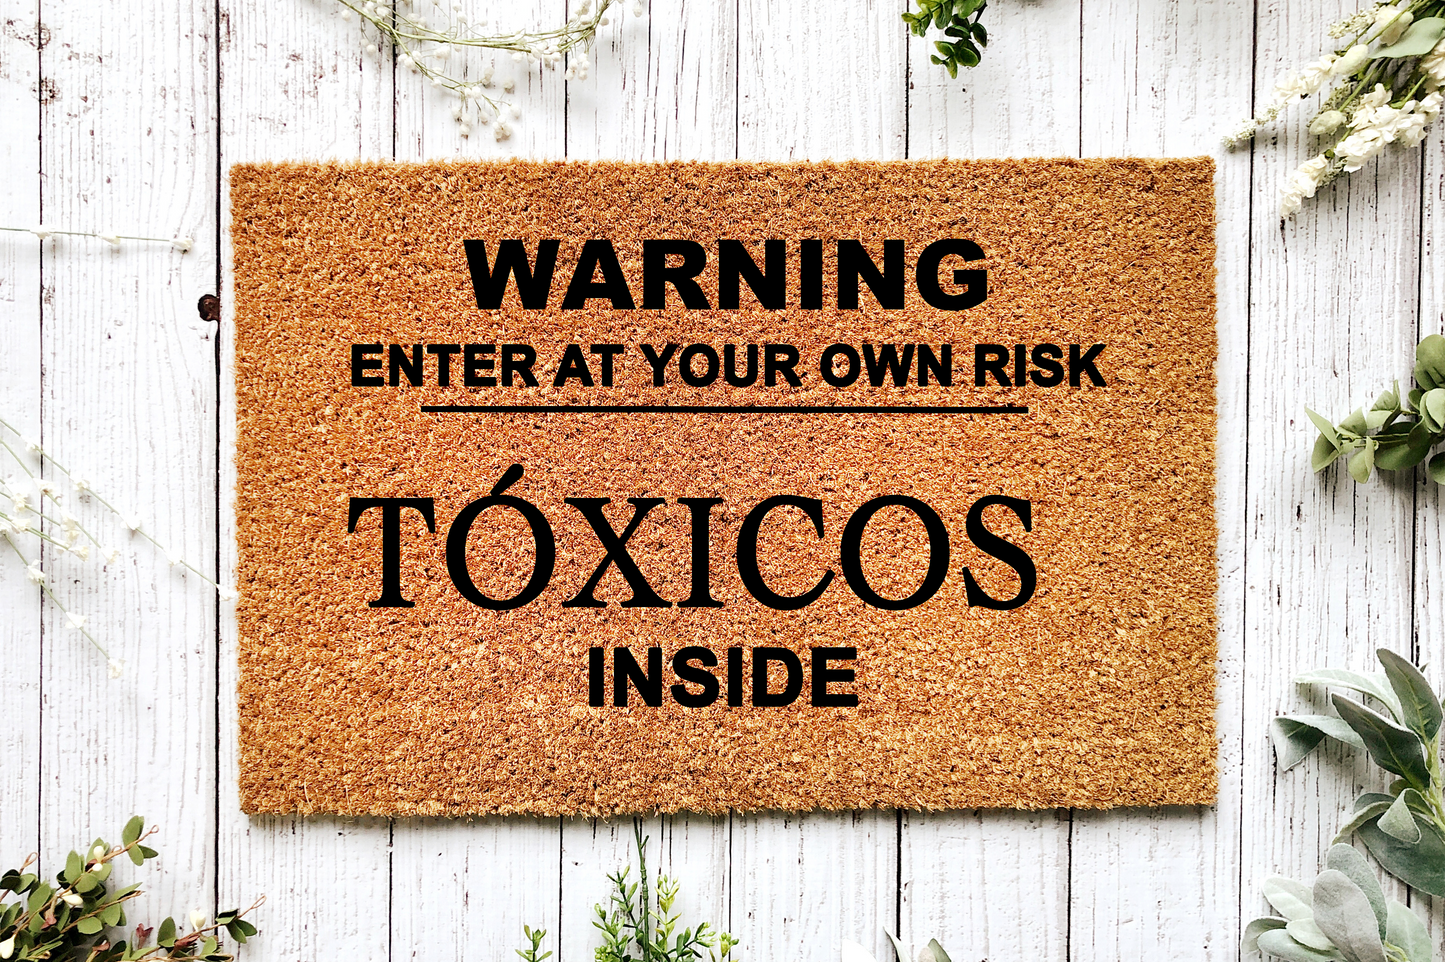 Doormat - WARNING ENTER AT YOUR OWN RISK TÓXICOS INSIDE